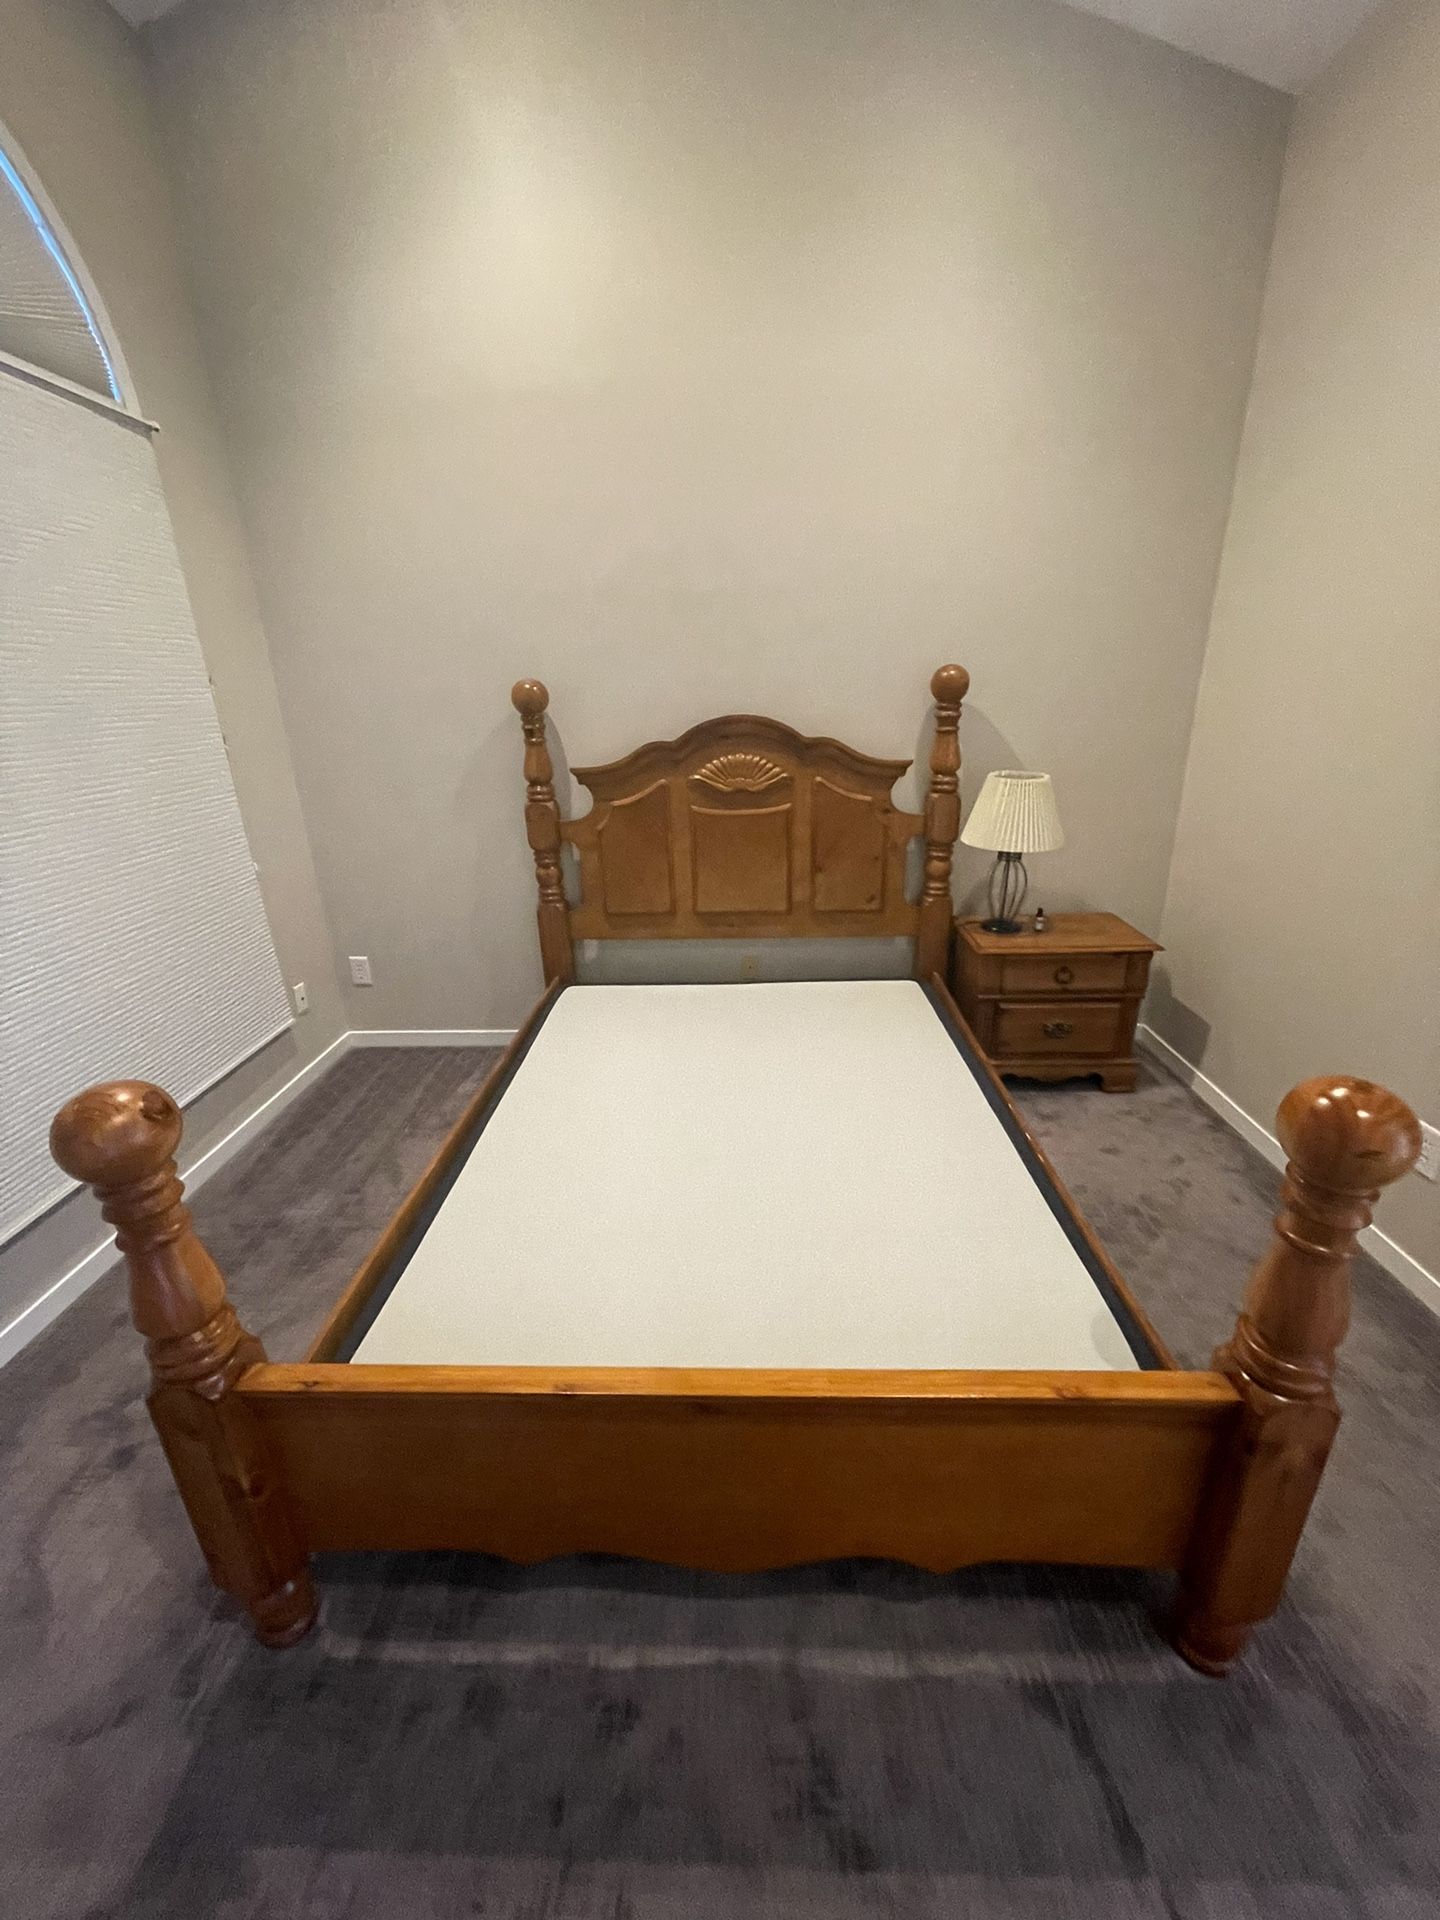 Queen Bed Frame / box Foundation With Night Stand Wood In Perfect Condition